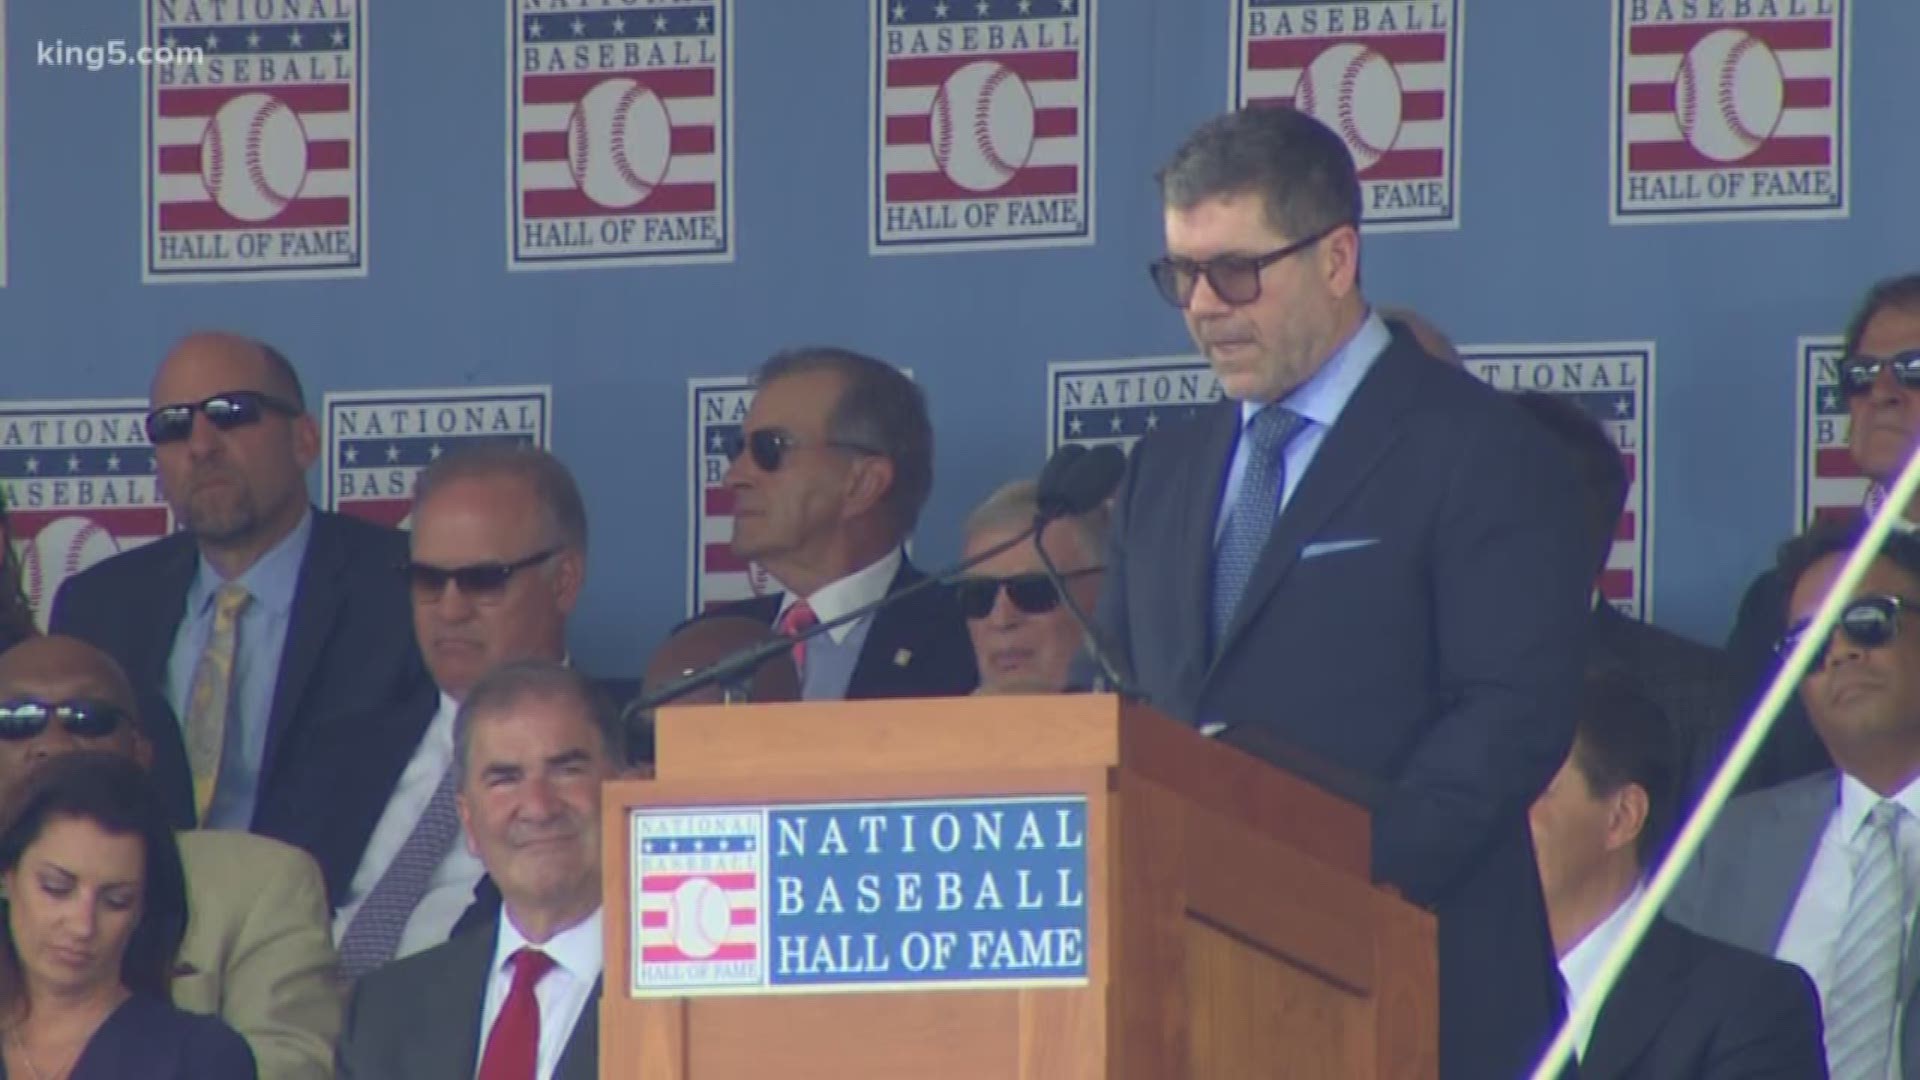 Edgar Martinez of the Seattle Mariners is inducted into the